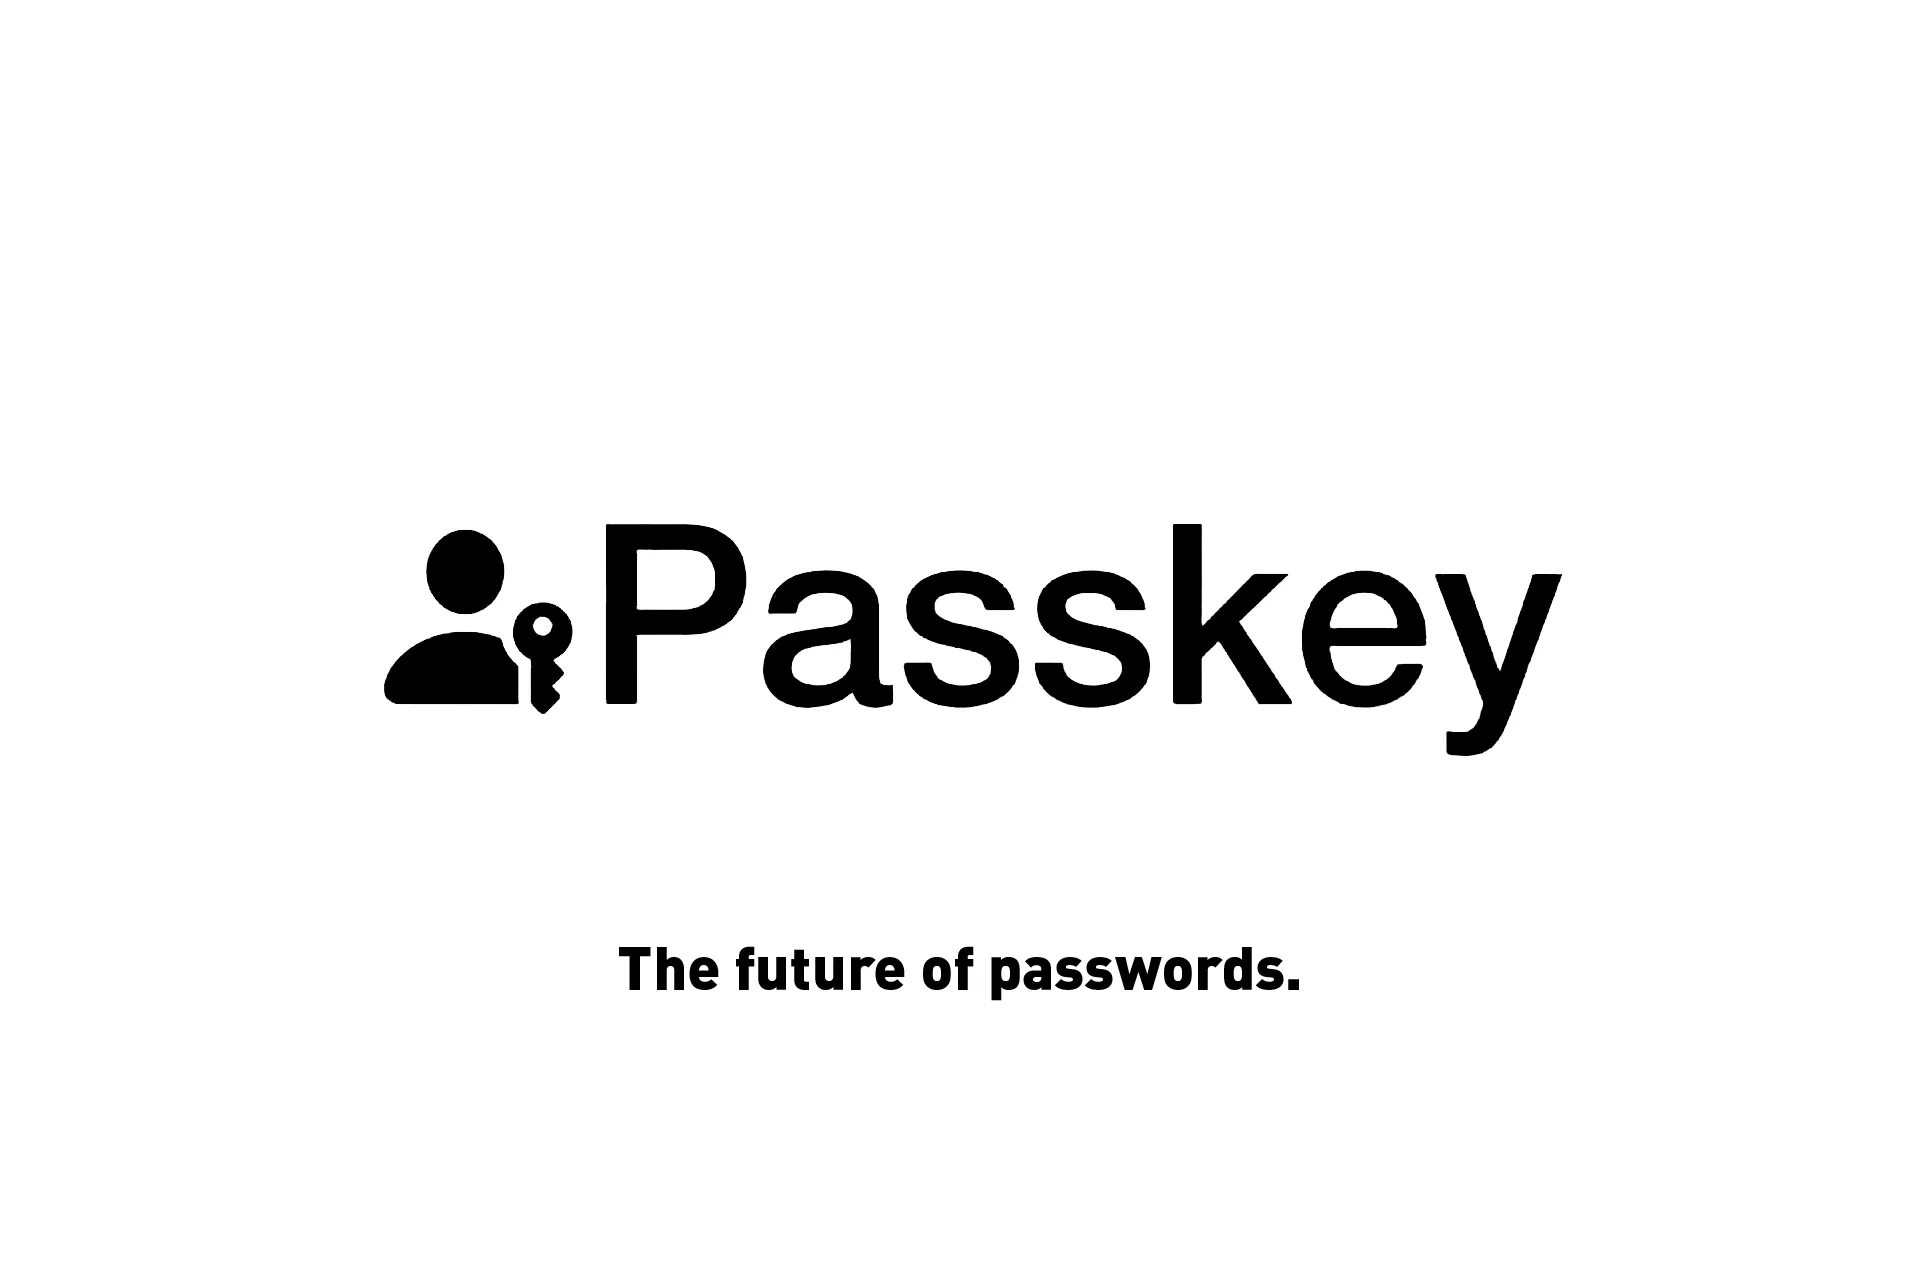 Apple's Passkey symbol with 'The Future of Passwords' below it.